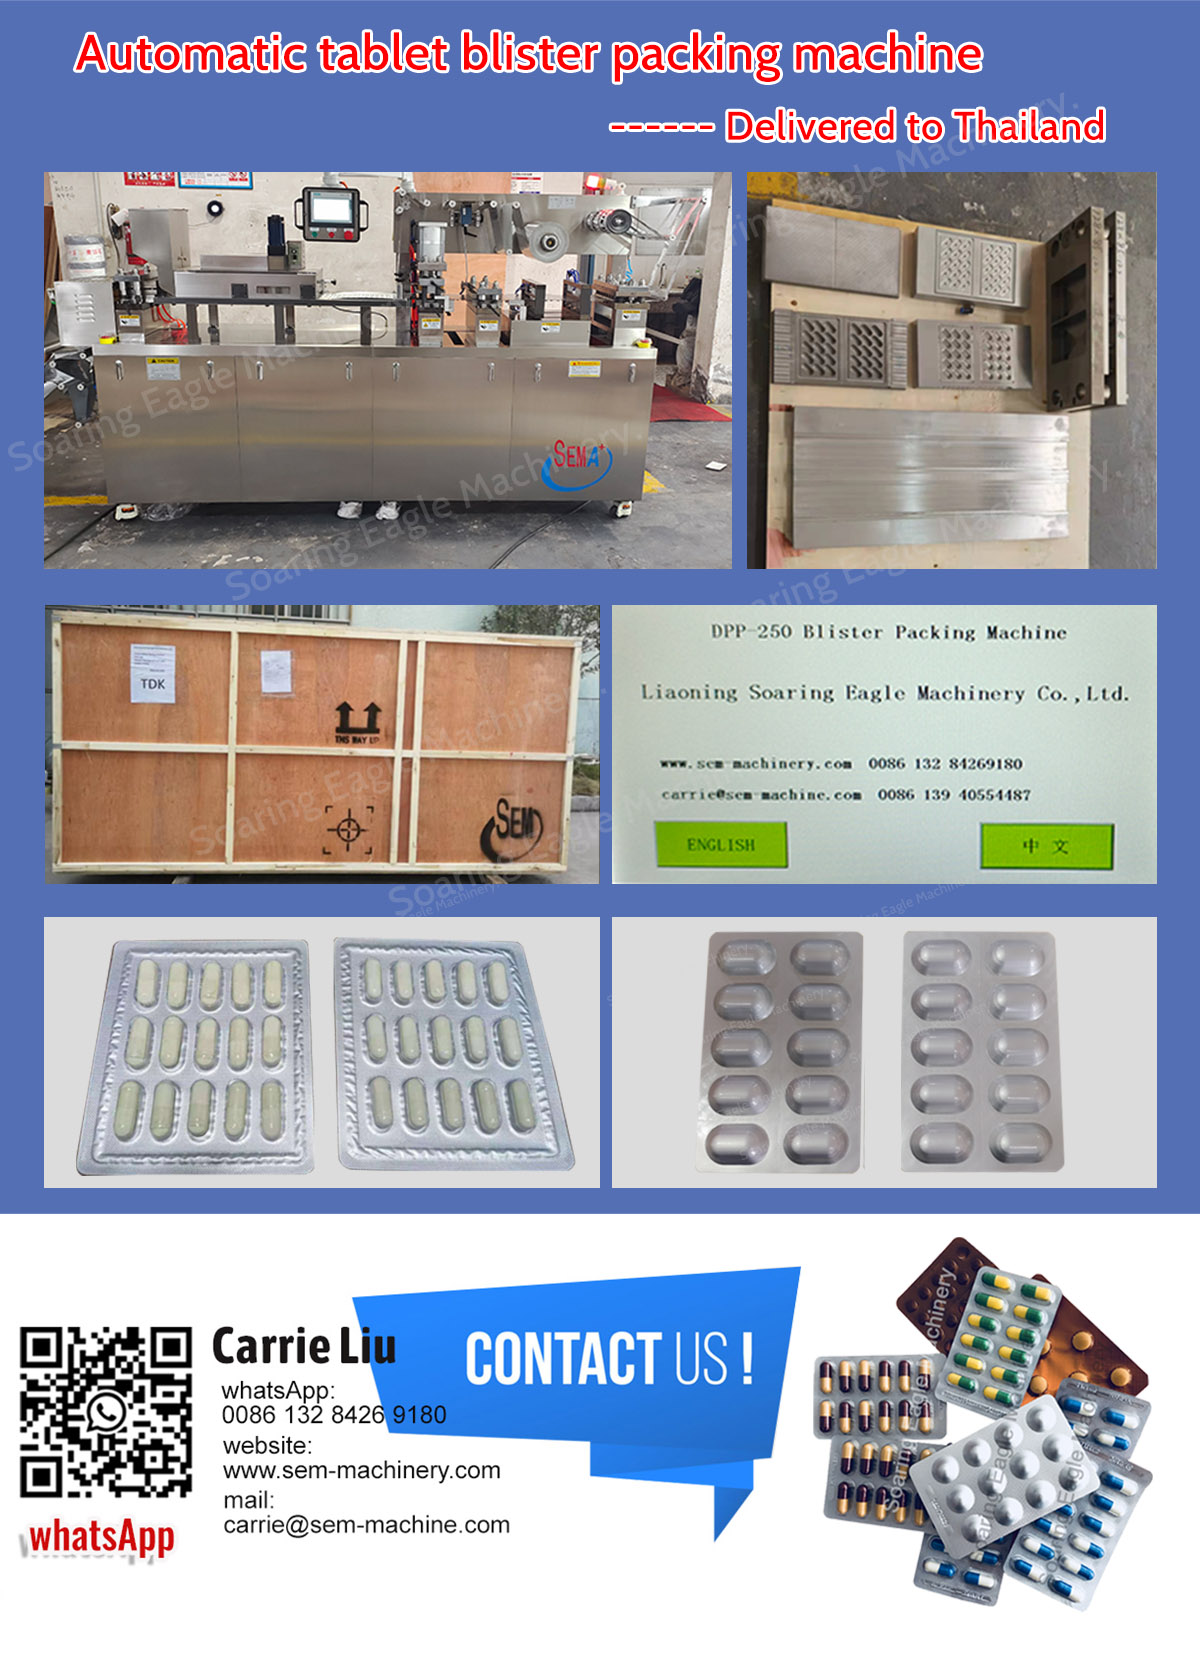 Automatic Tablet Blister Packaging Machine ——deliver to Thailand